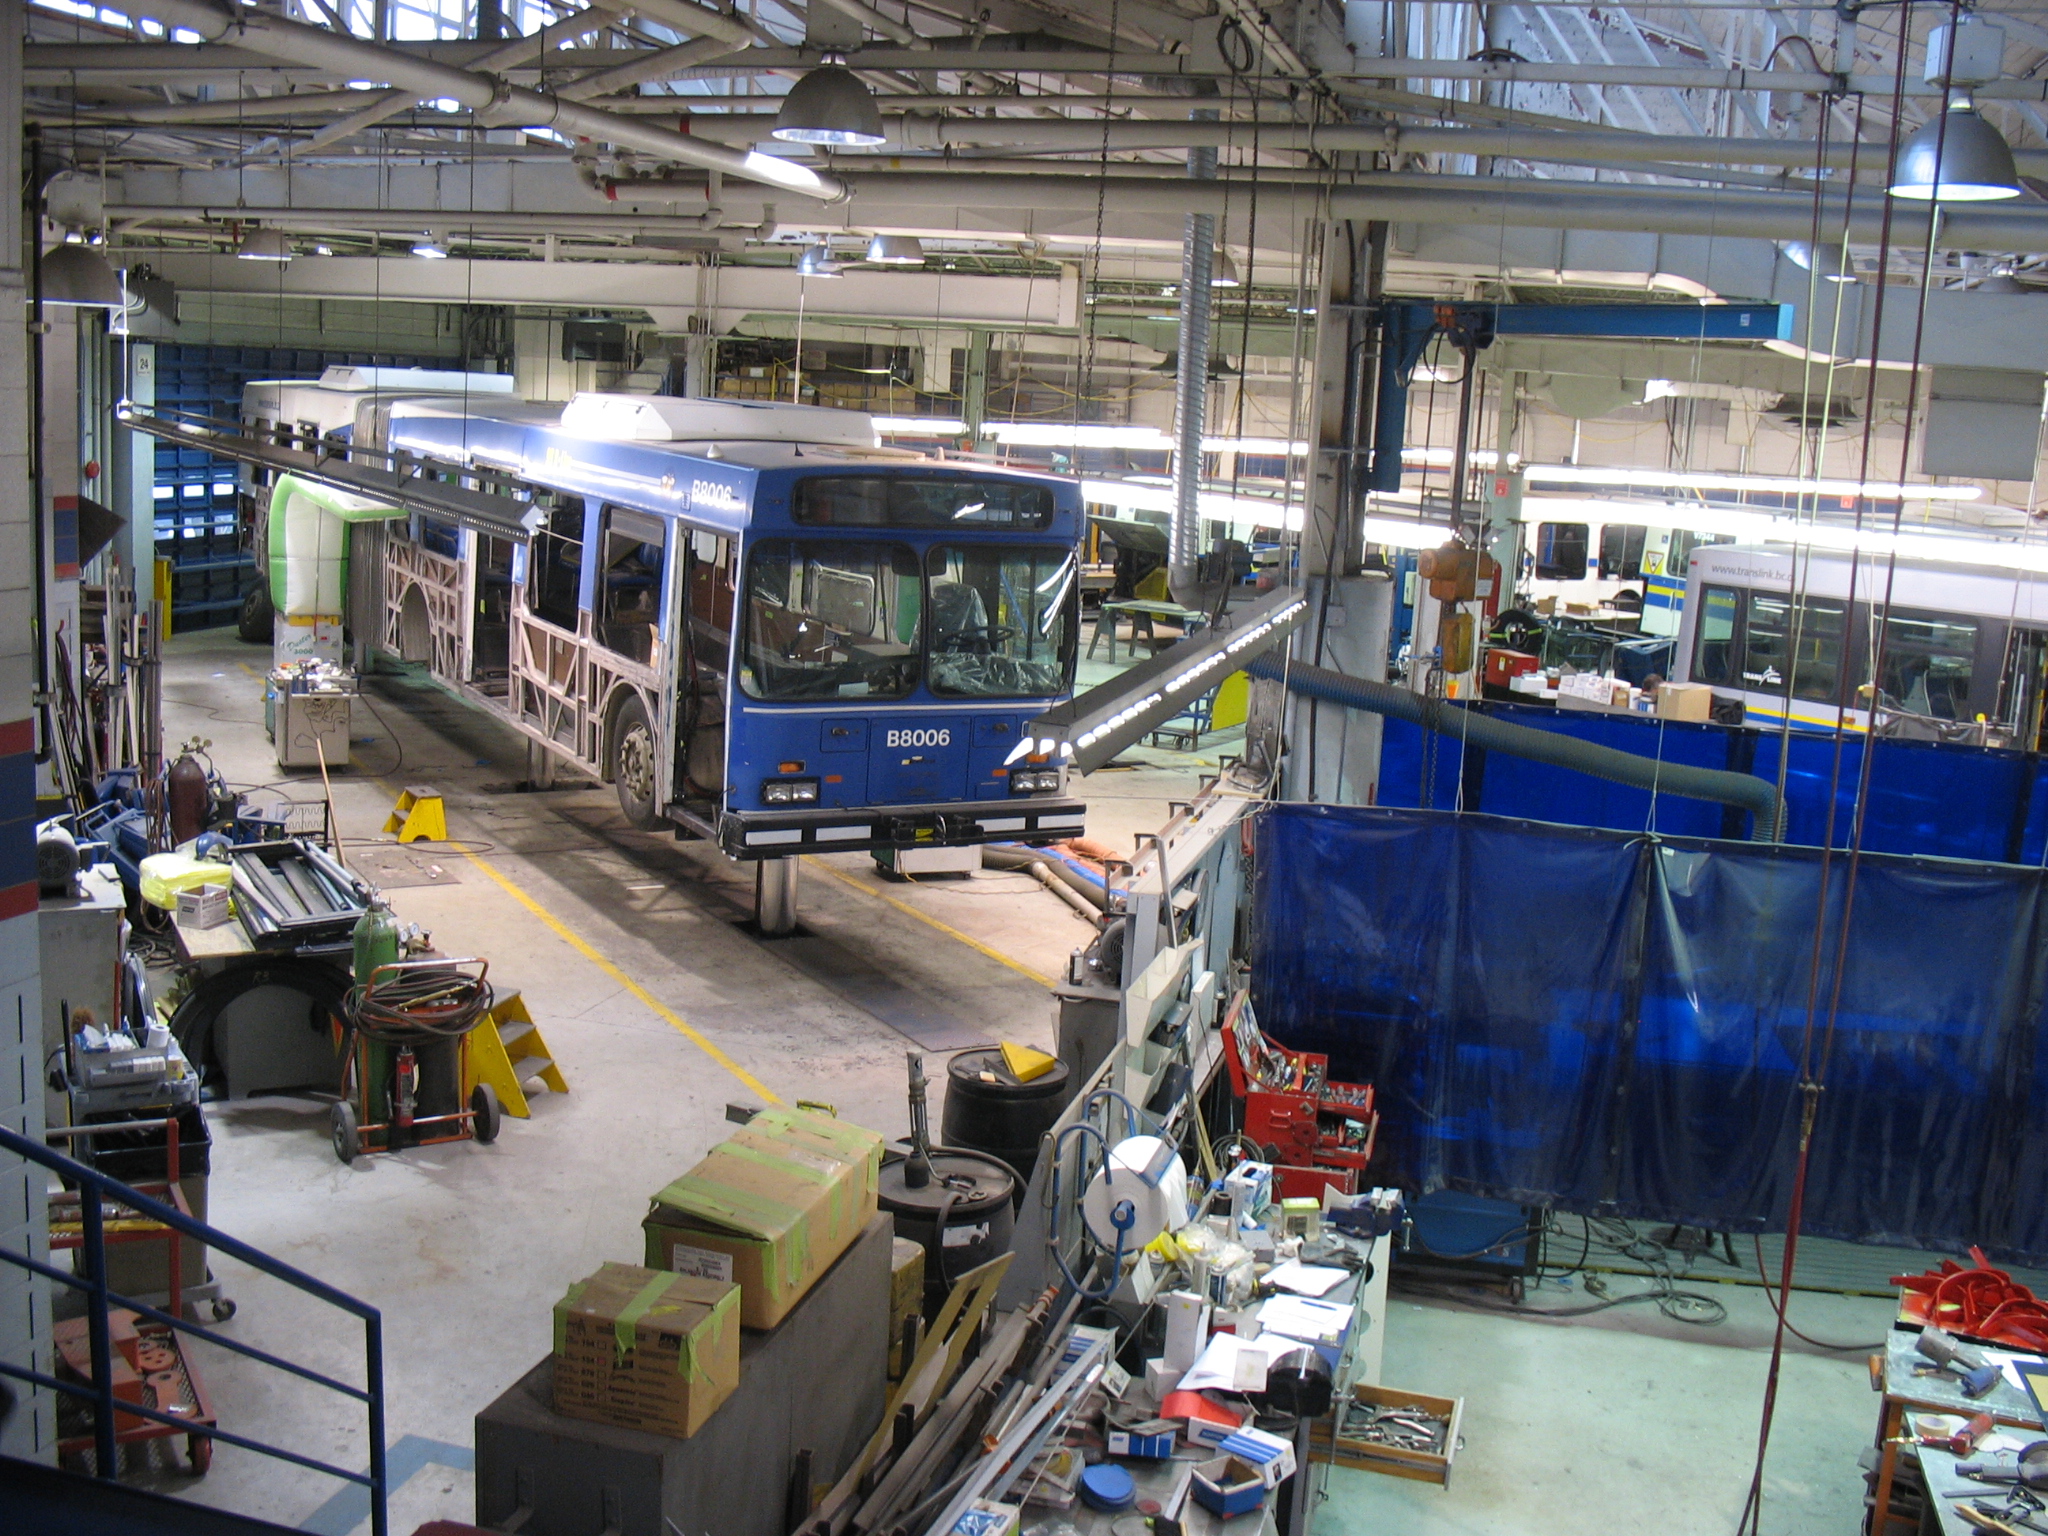 Another view of the articulated bus getting a mid-life overhaul. Notice that its lower body panels have been stripped off!